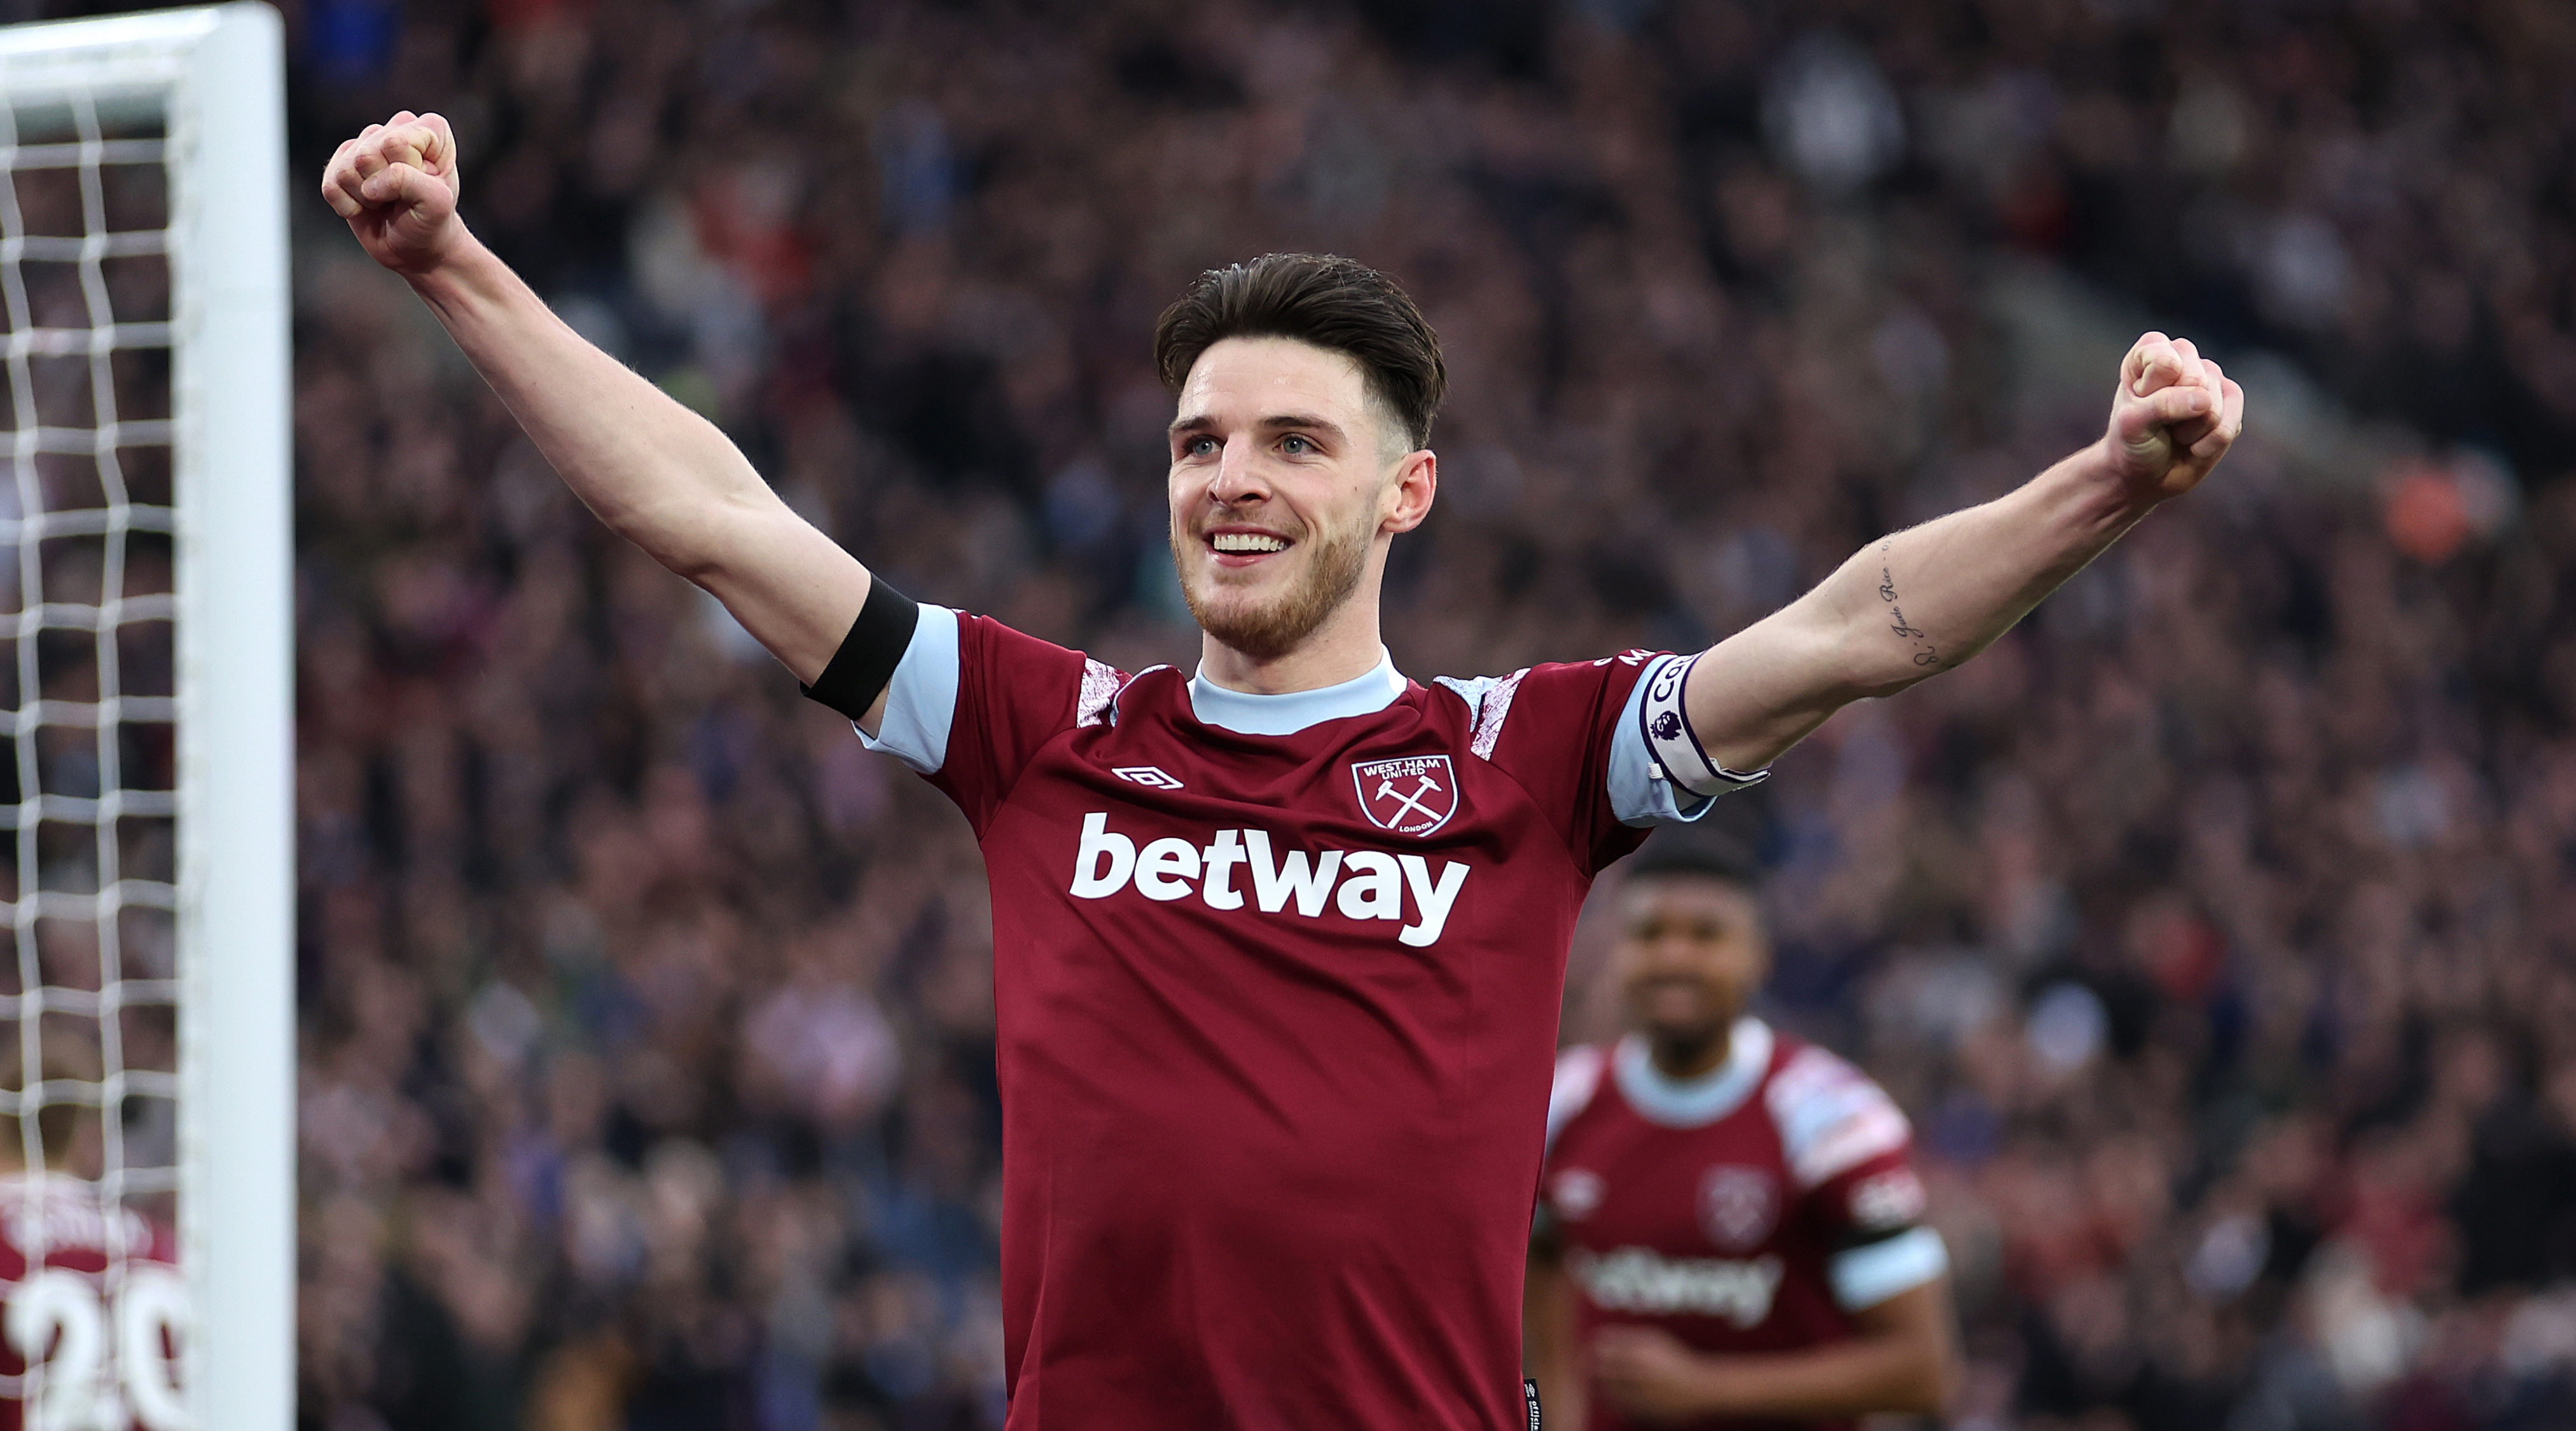 Gent vs West Ham live stream, match preview, team news and kick-off time for this Europa Conference League match FourFourTwo